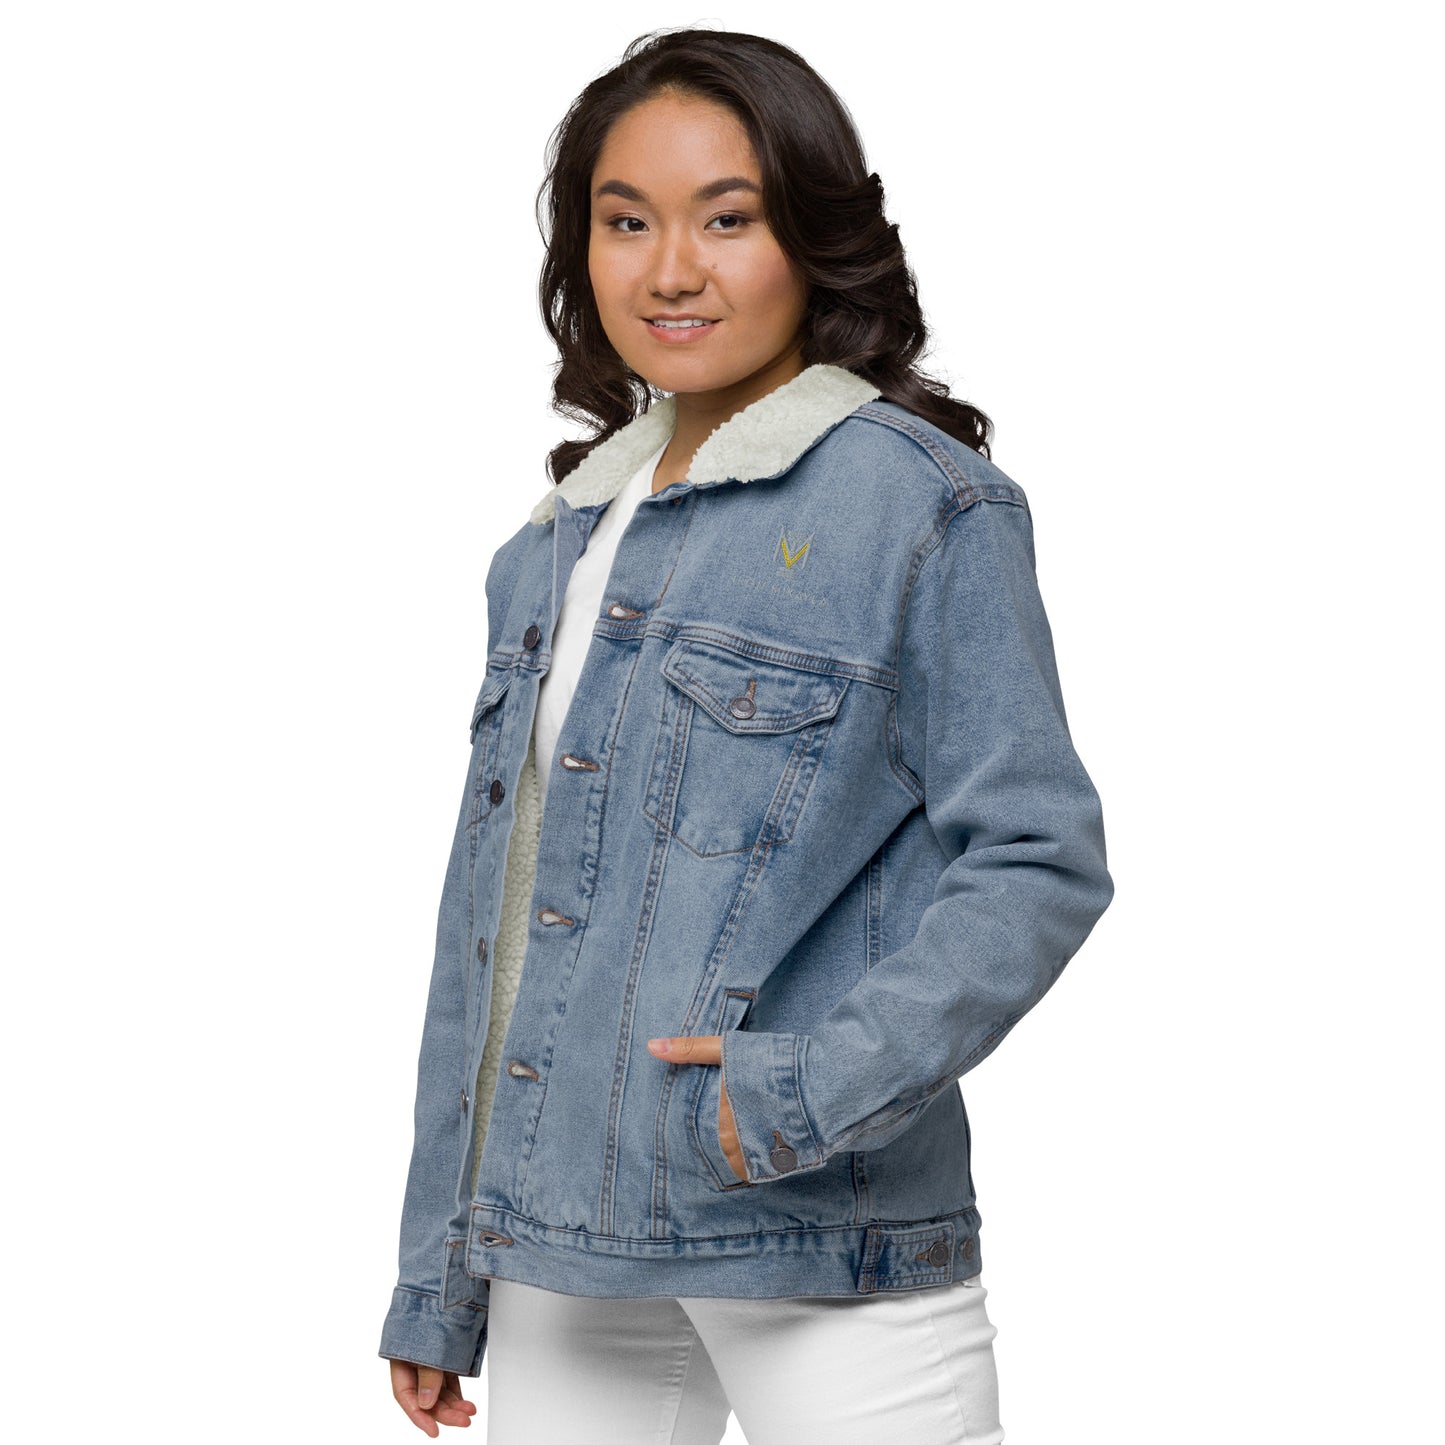 Relaxed fit denim sherpa jacket